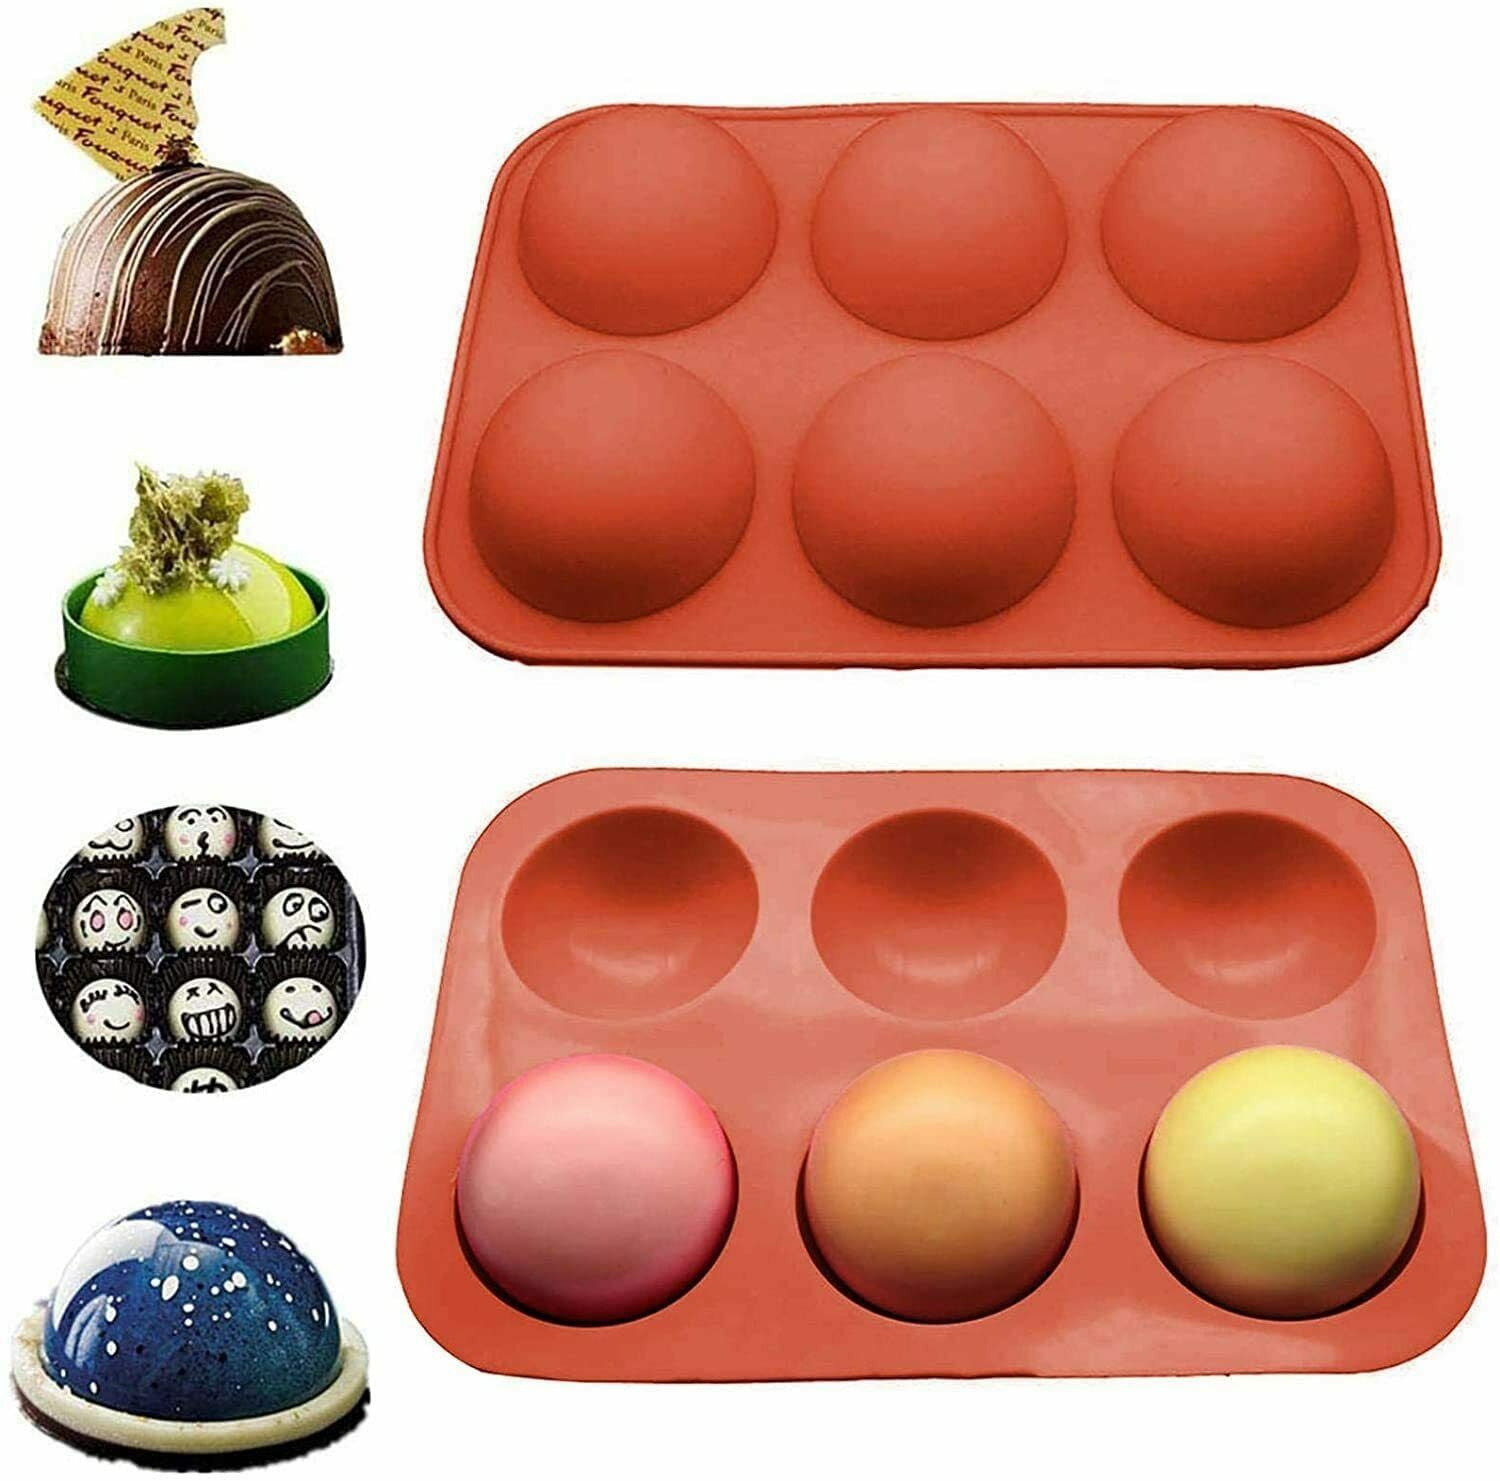 5cm Dia Half Ball Sphere Chocolate Cake Muffin Pastry JellY Silicone Mold T N1Y1